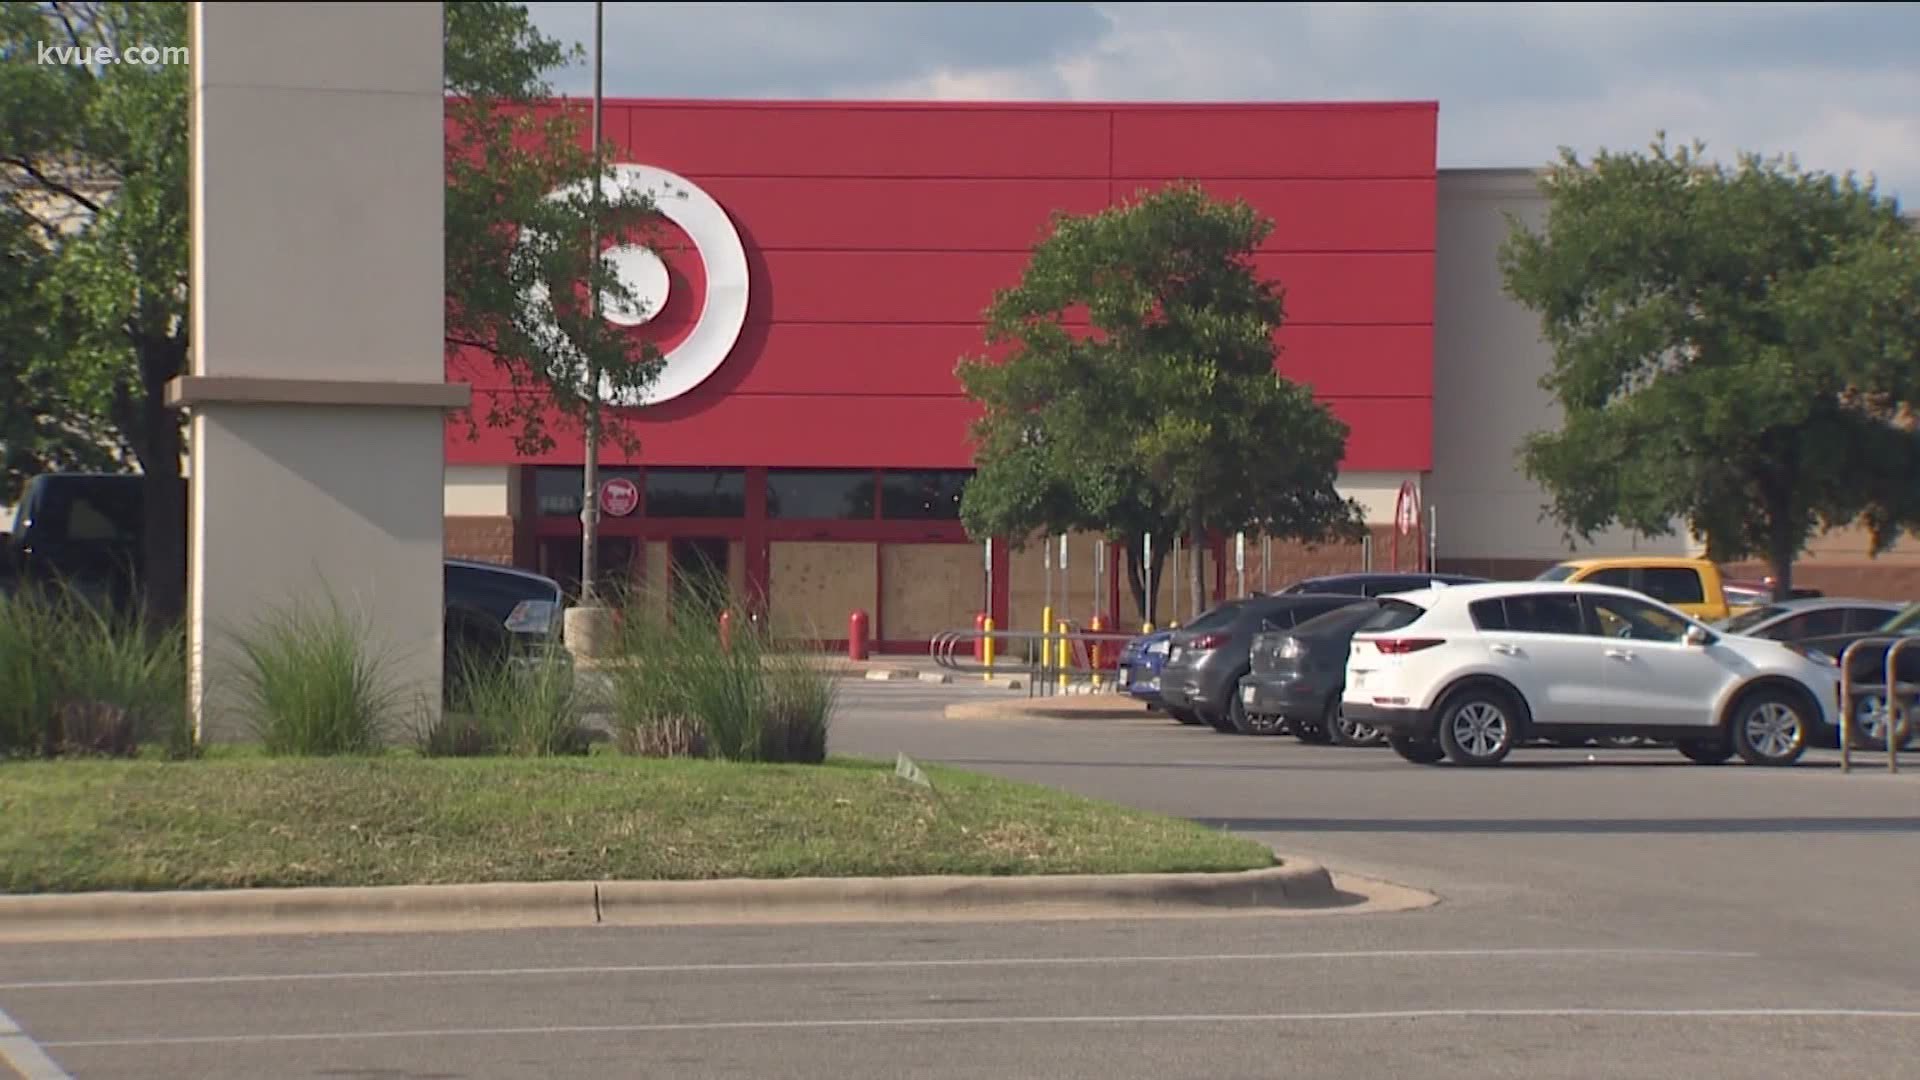 Three people are now charged after looting and causing property damage at the Capital Plaza Target on Sunday.